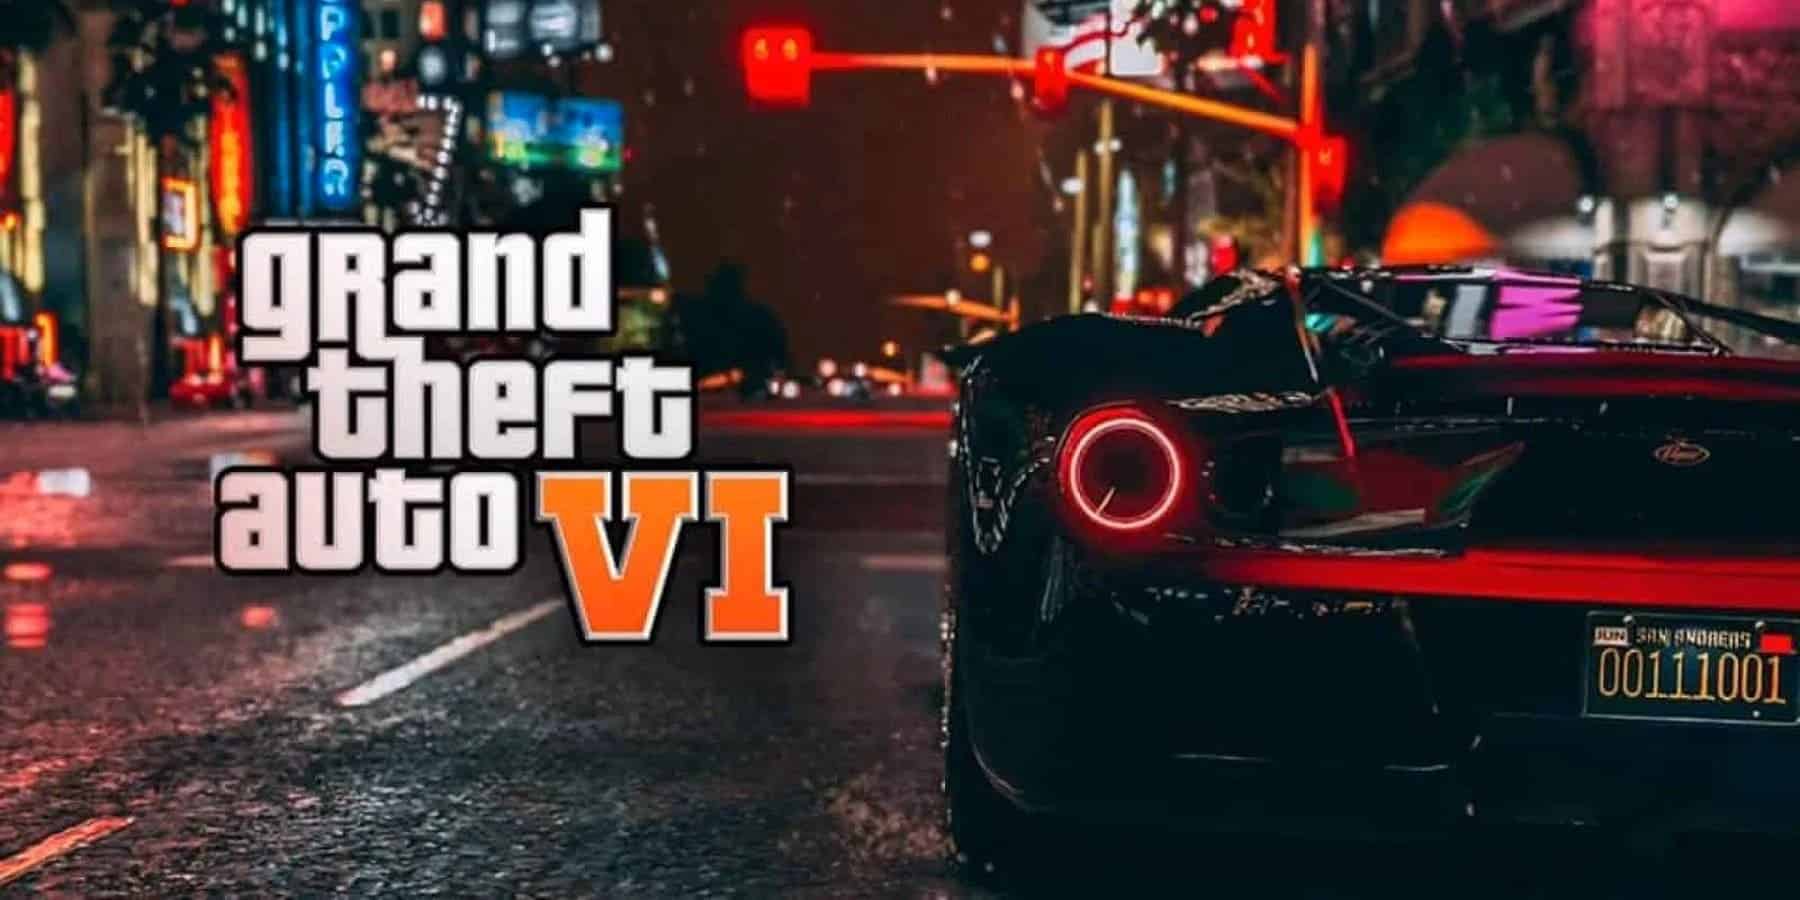 Rockstar Games confirmed that Grand Theft Auto 6 leaks are real